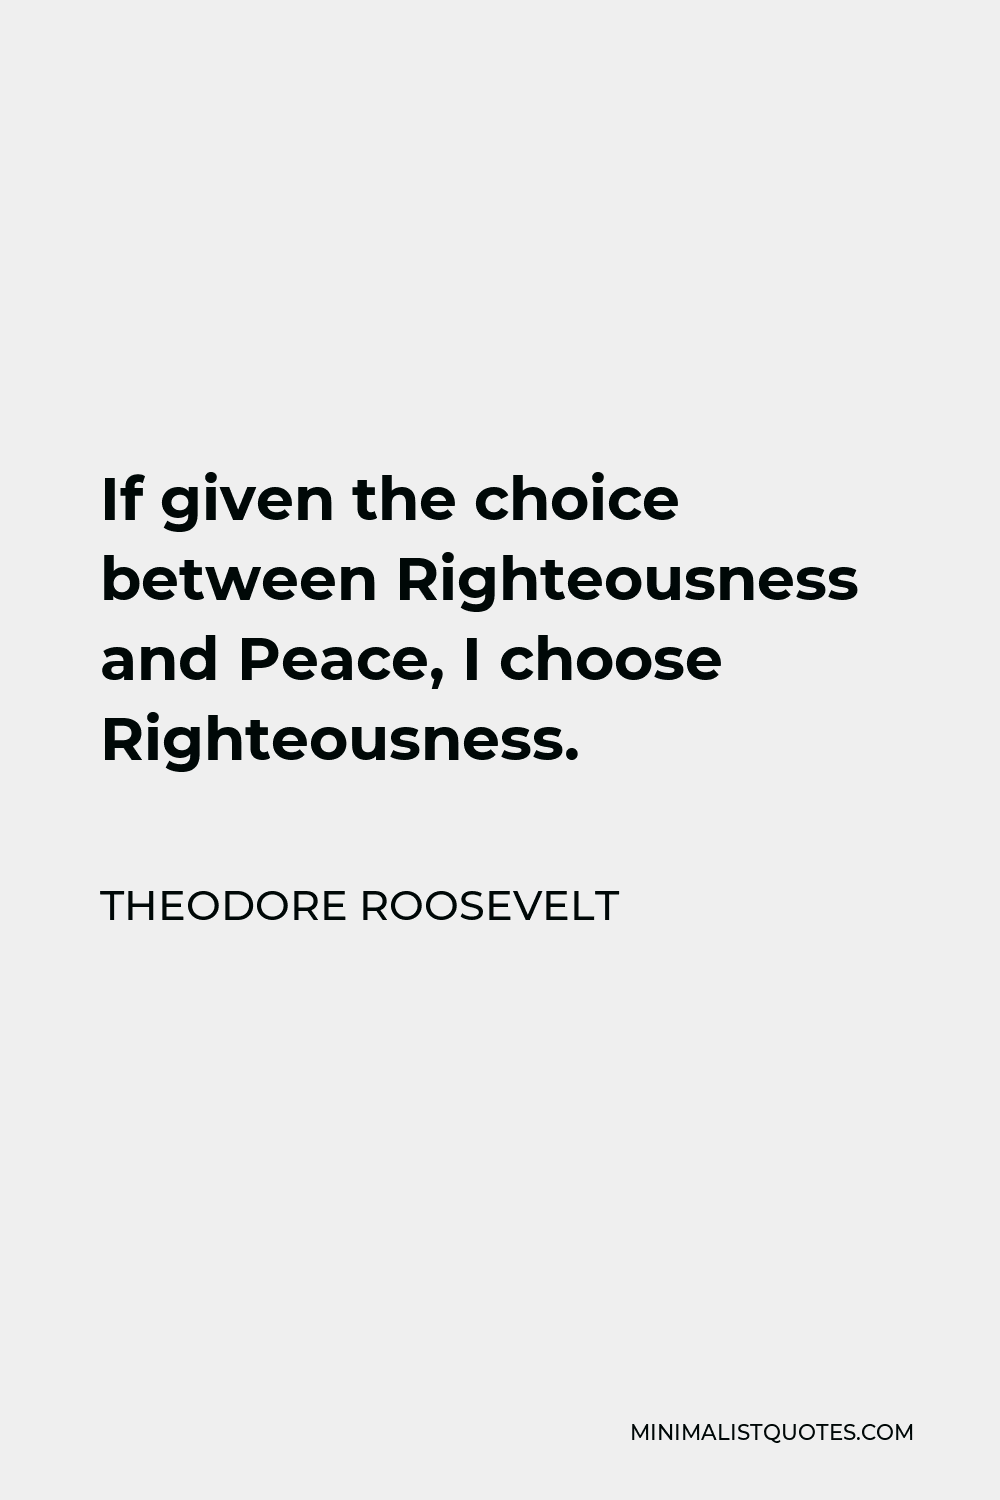 Theodore Roosevelt Quote - If given the choice between Righteousness and Peace, I choose Righteousness.